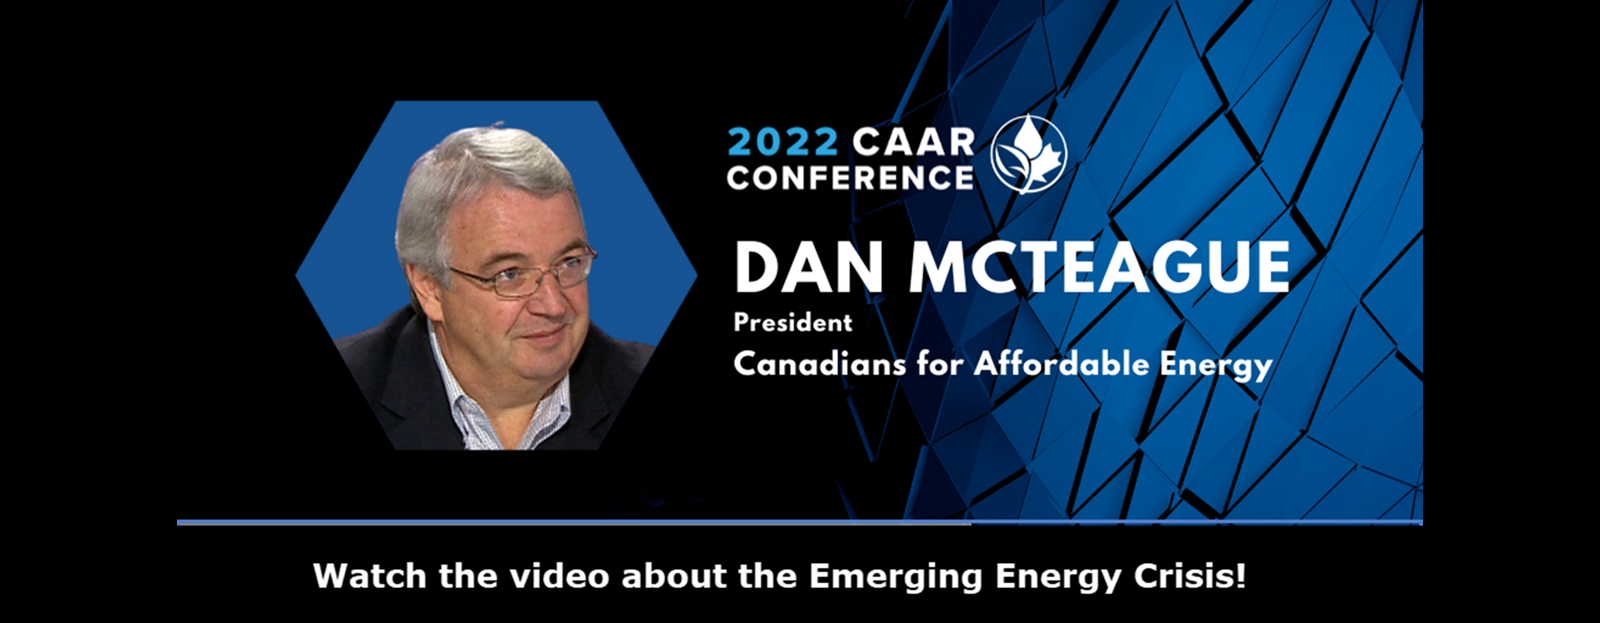 Banner for Emerging Energy Crisis with Dan McTeague